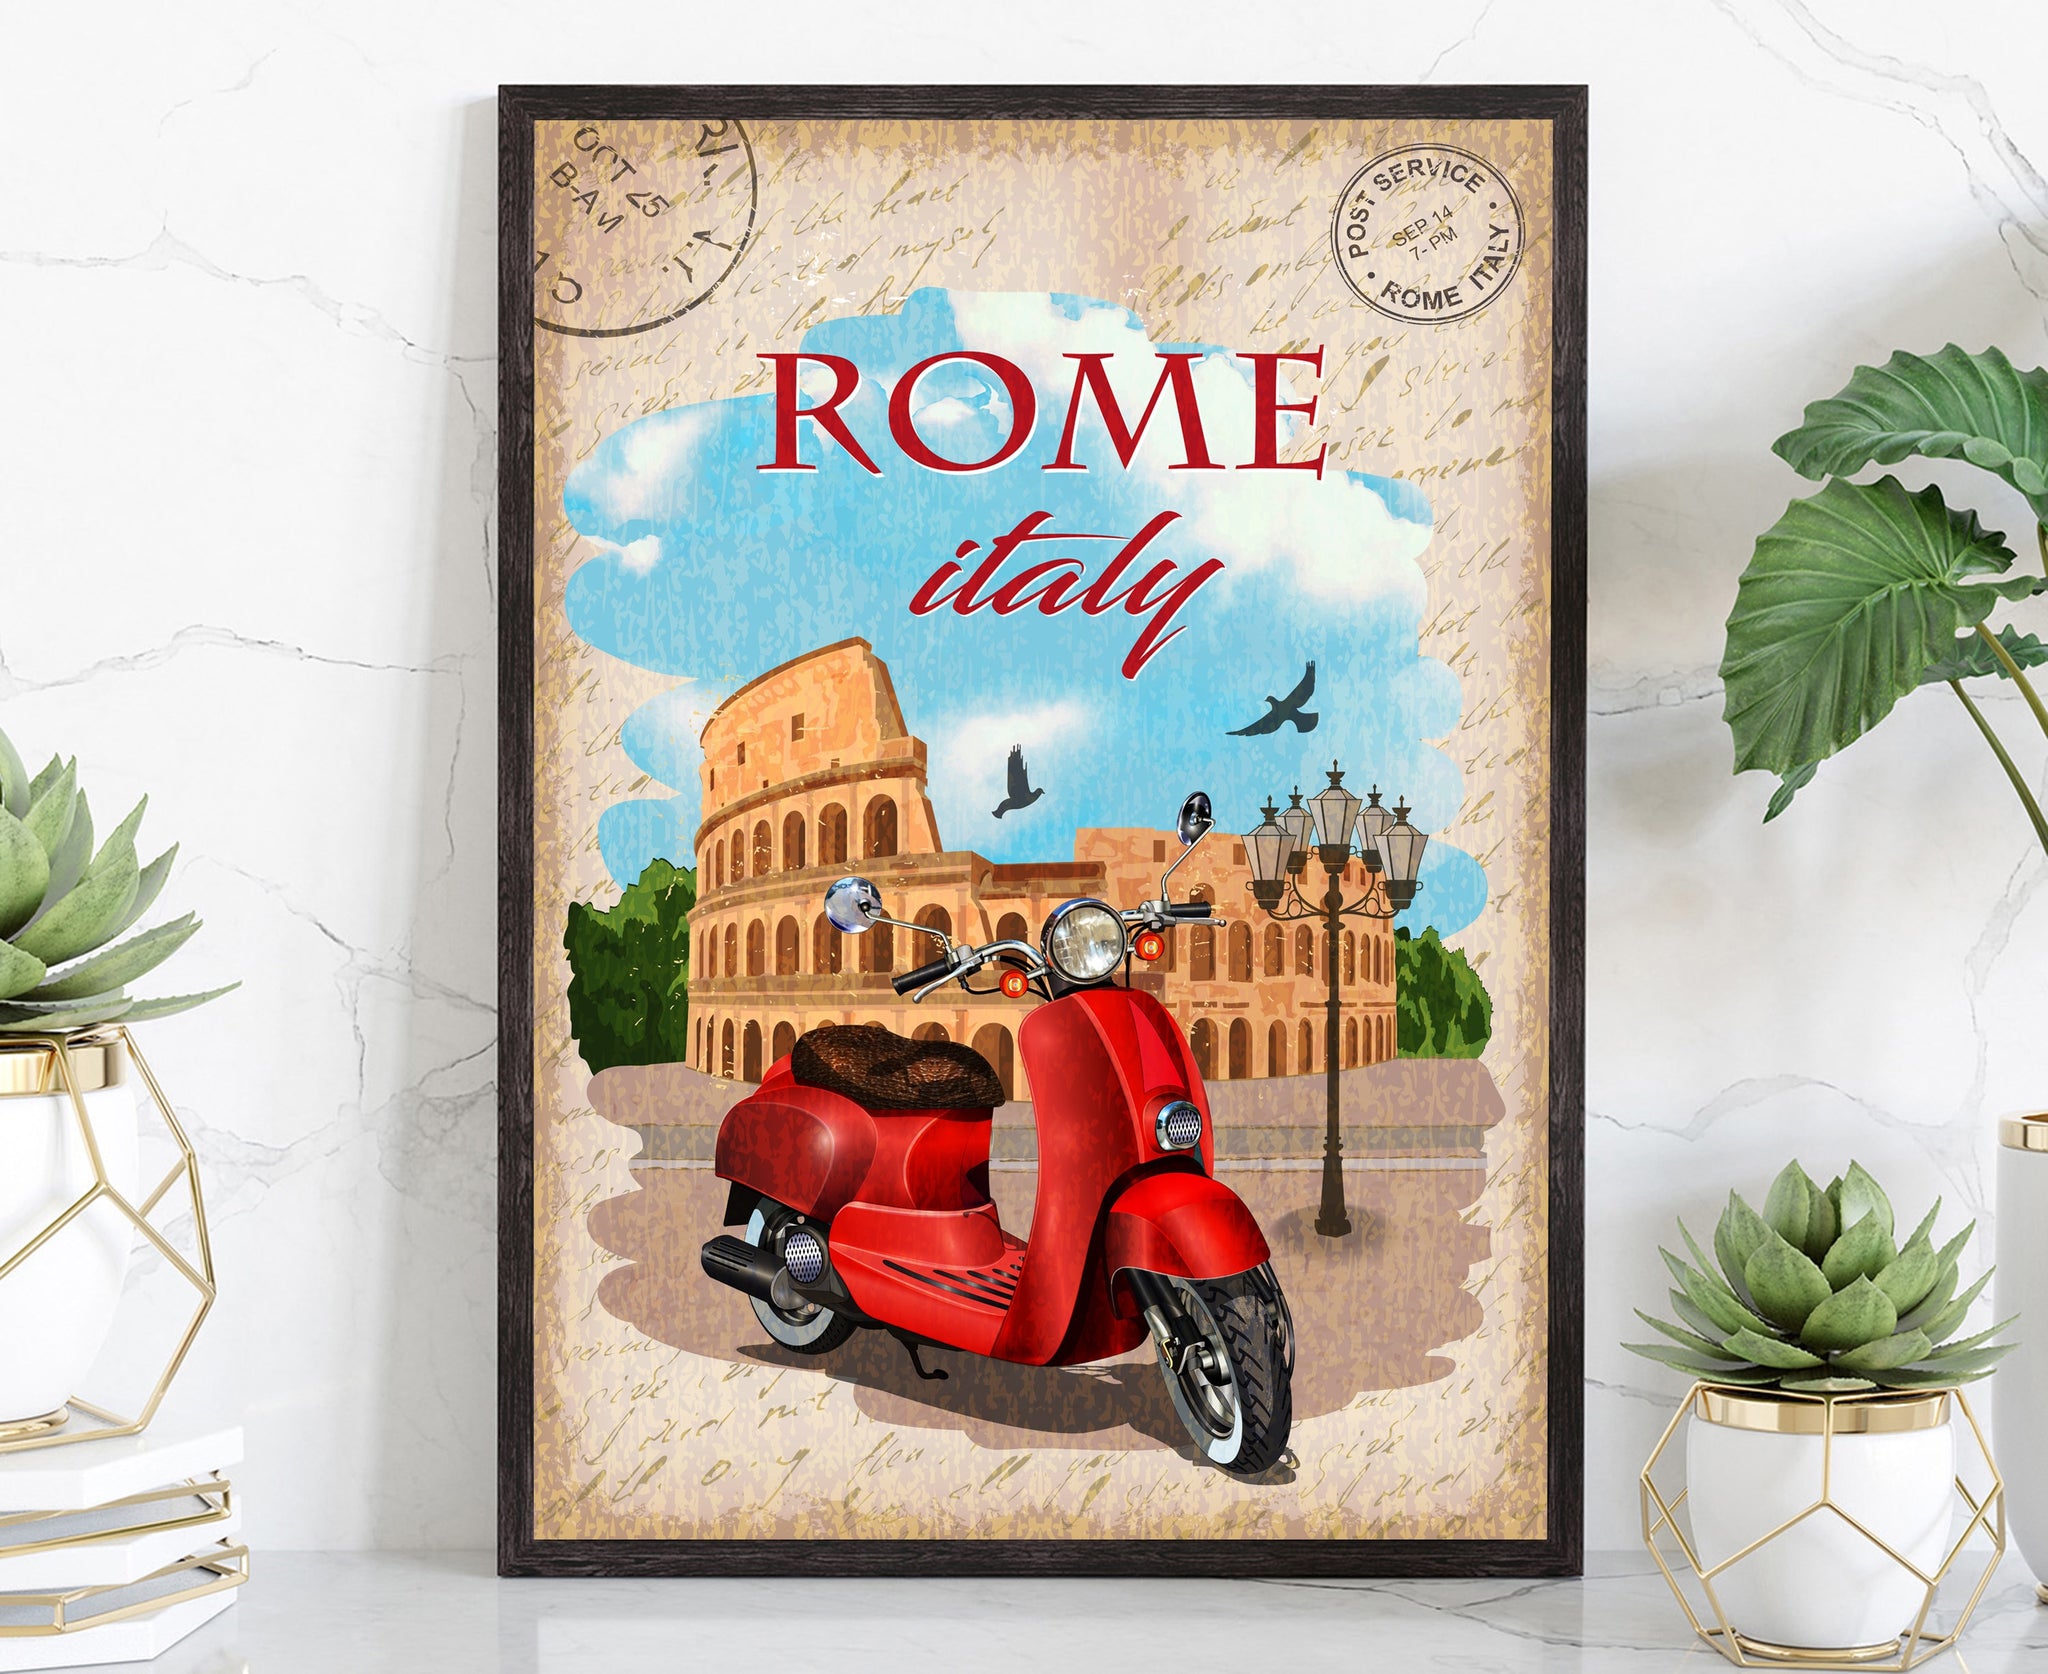 ITALY ROME travel poster, Rome cityscape poster artwork, Italy Rome landmark poster wall art, Home wall art, Office wall decoration